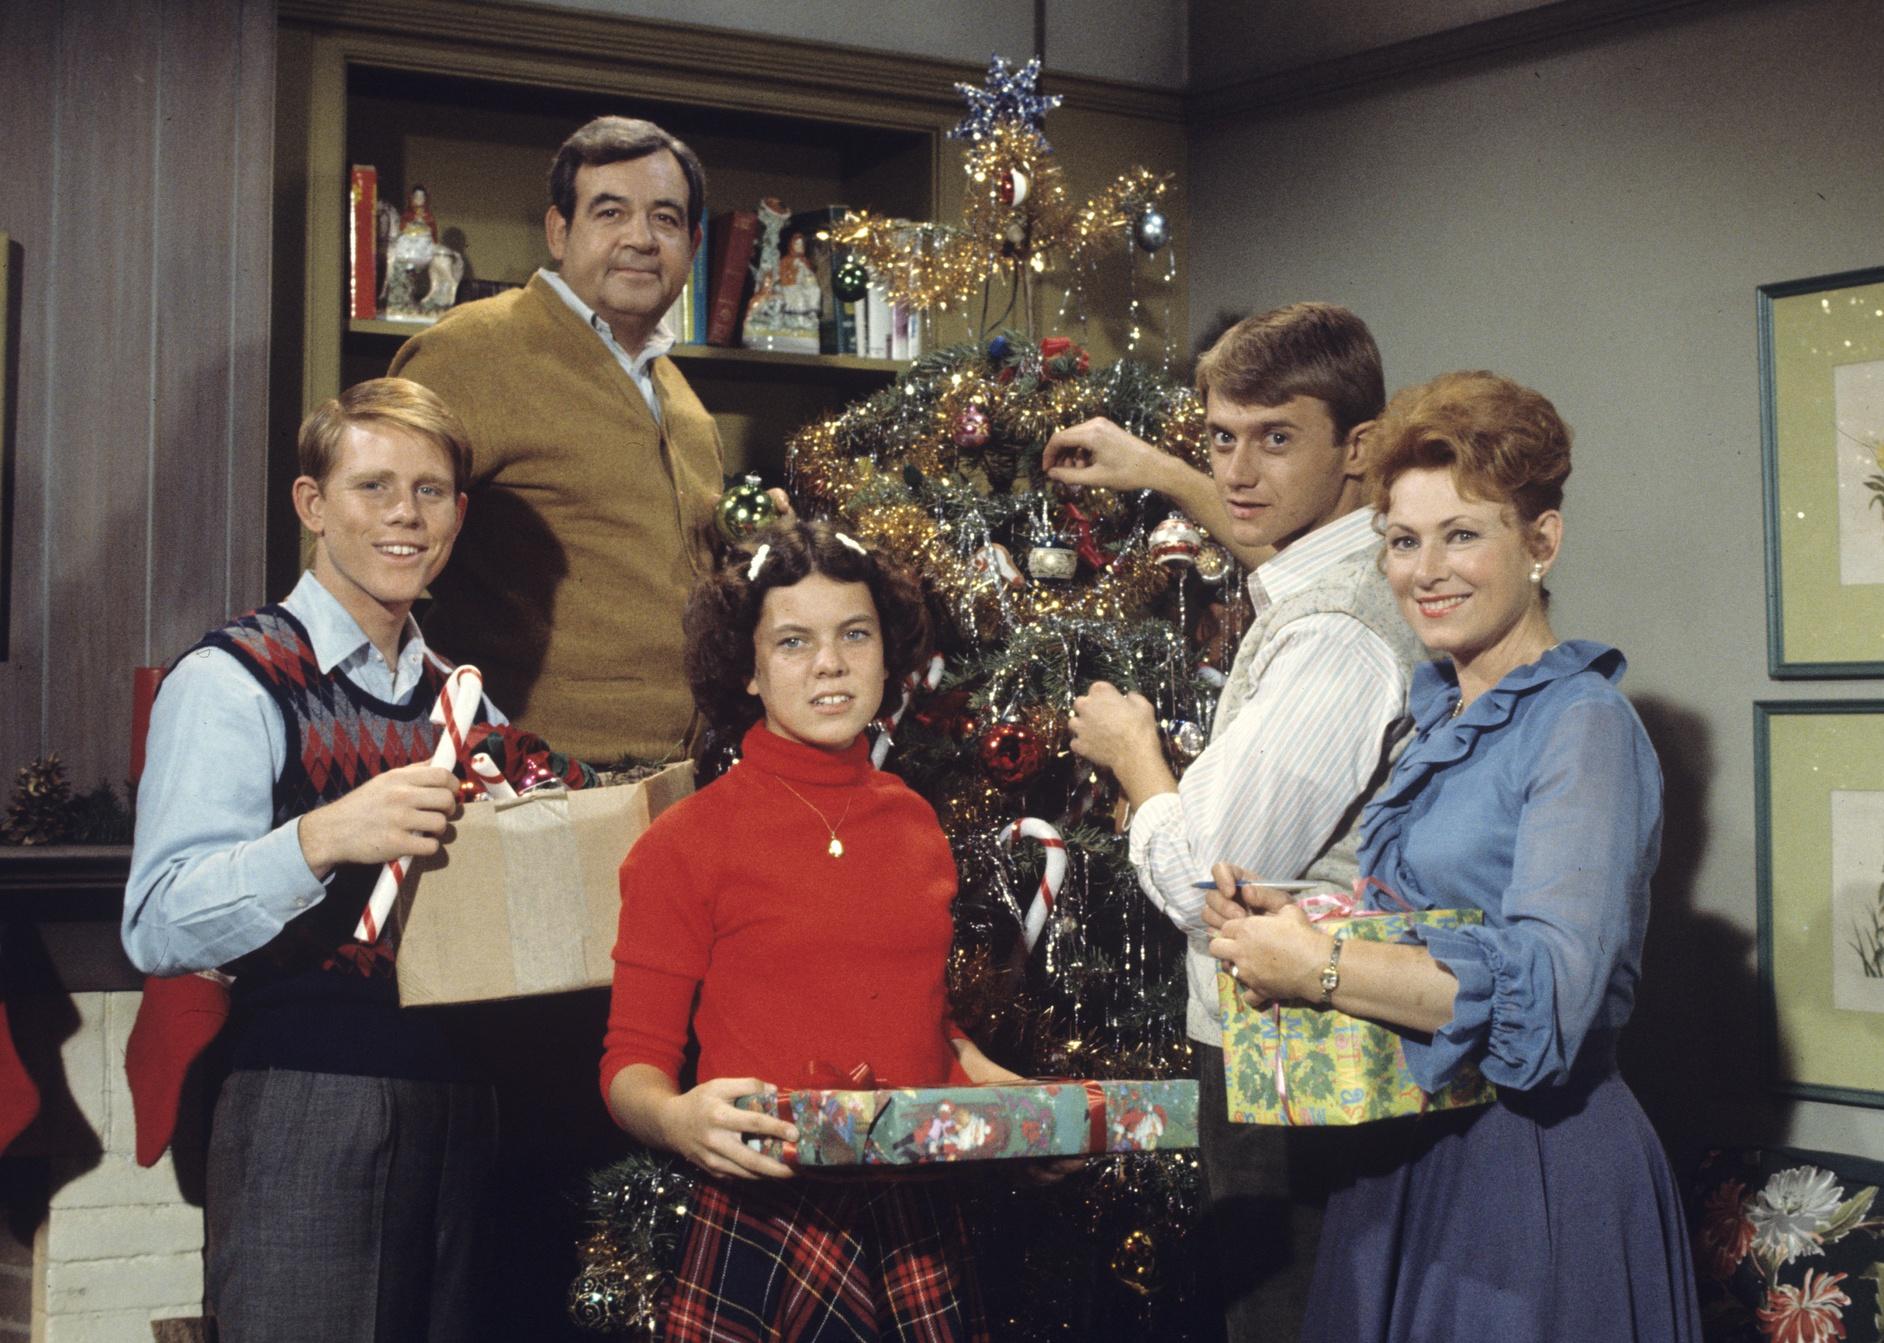 A family decorating and posing in front of a Christmas tree.